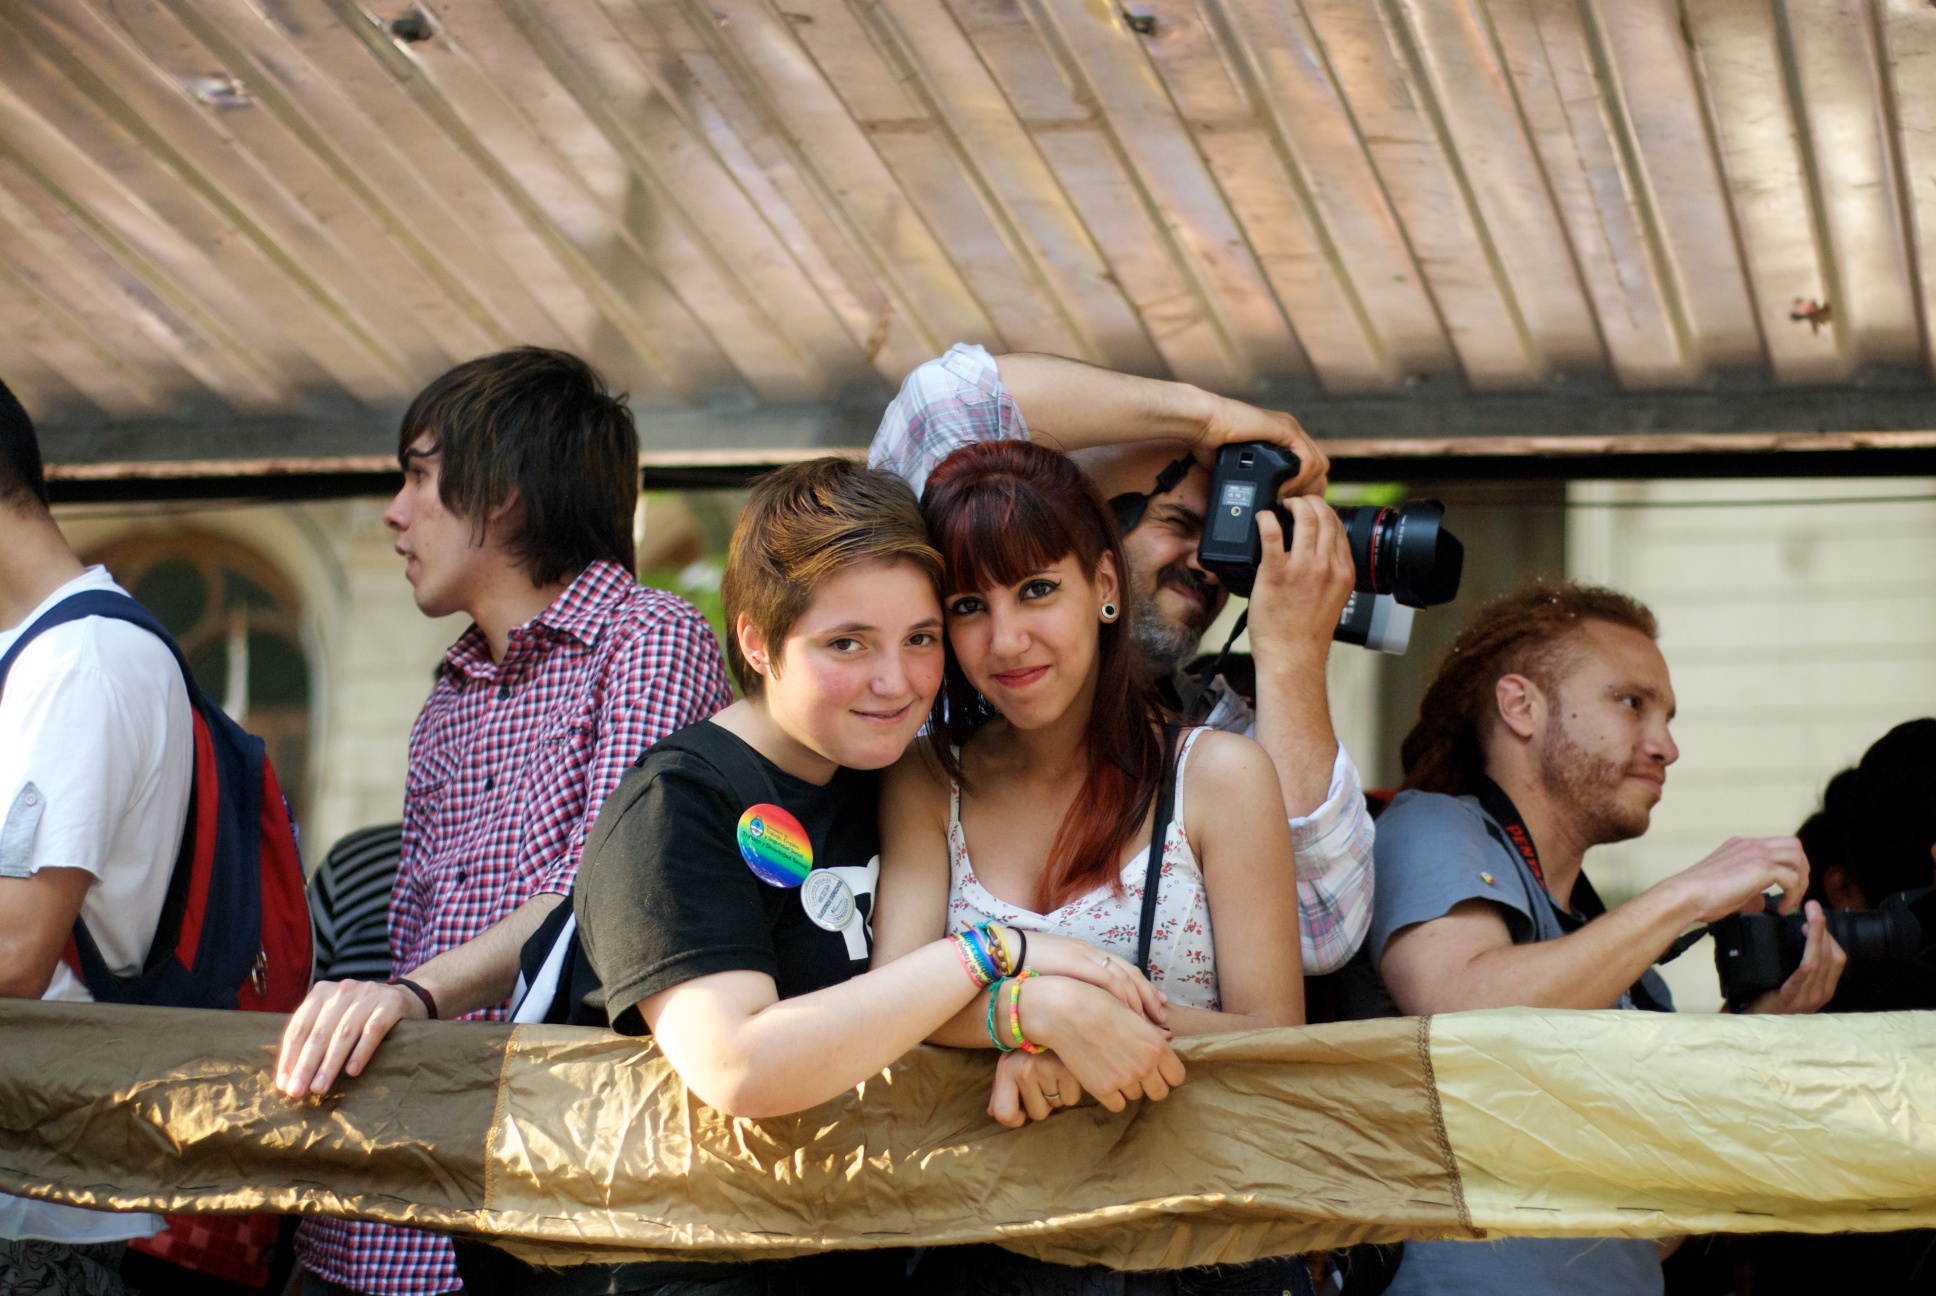 This teen couple is at a LGBTQIA pride event.^[[Image](https://www.flickr.com/photos/blmurch/6323444574/) by [Beatrice Murch](https://www.flickr.com/photos/blmurch/) is licensed under [CC BY 2.0](https://creativecommons.org/licenses/by/2.0/)]